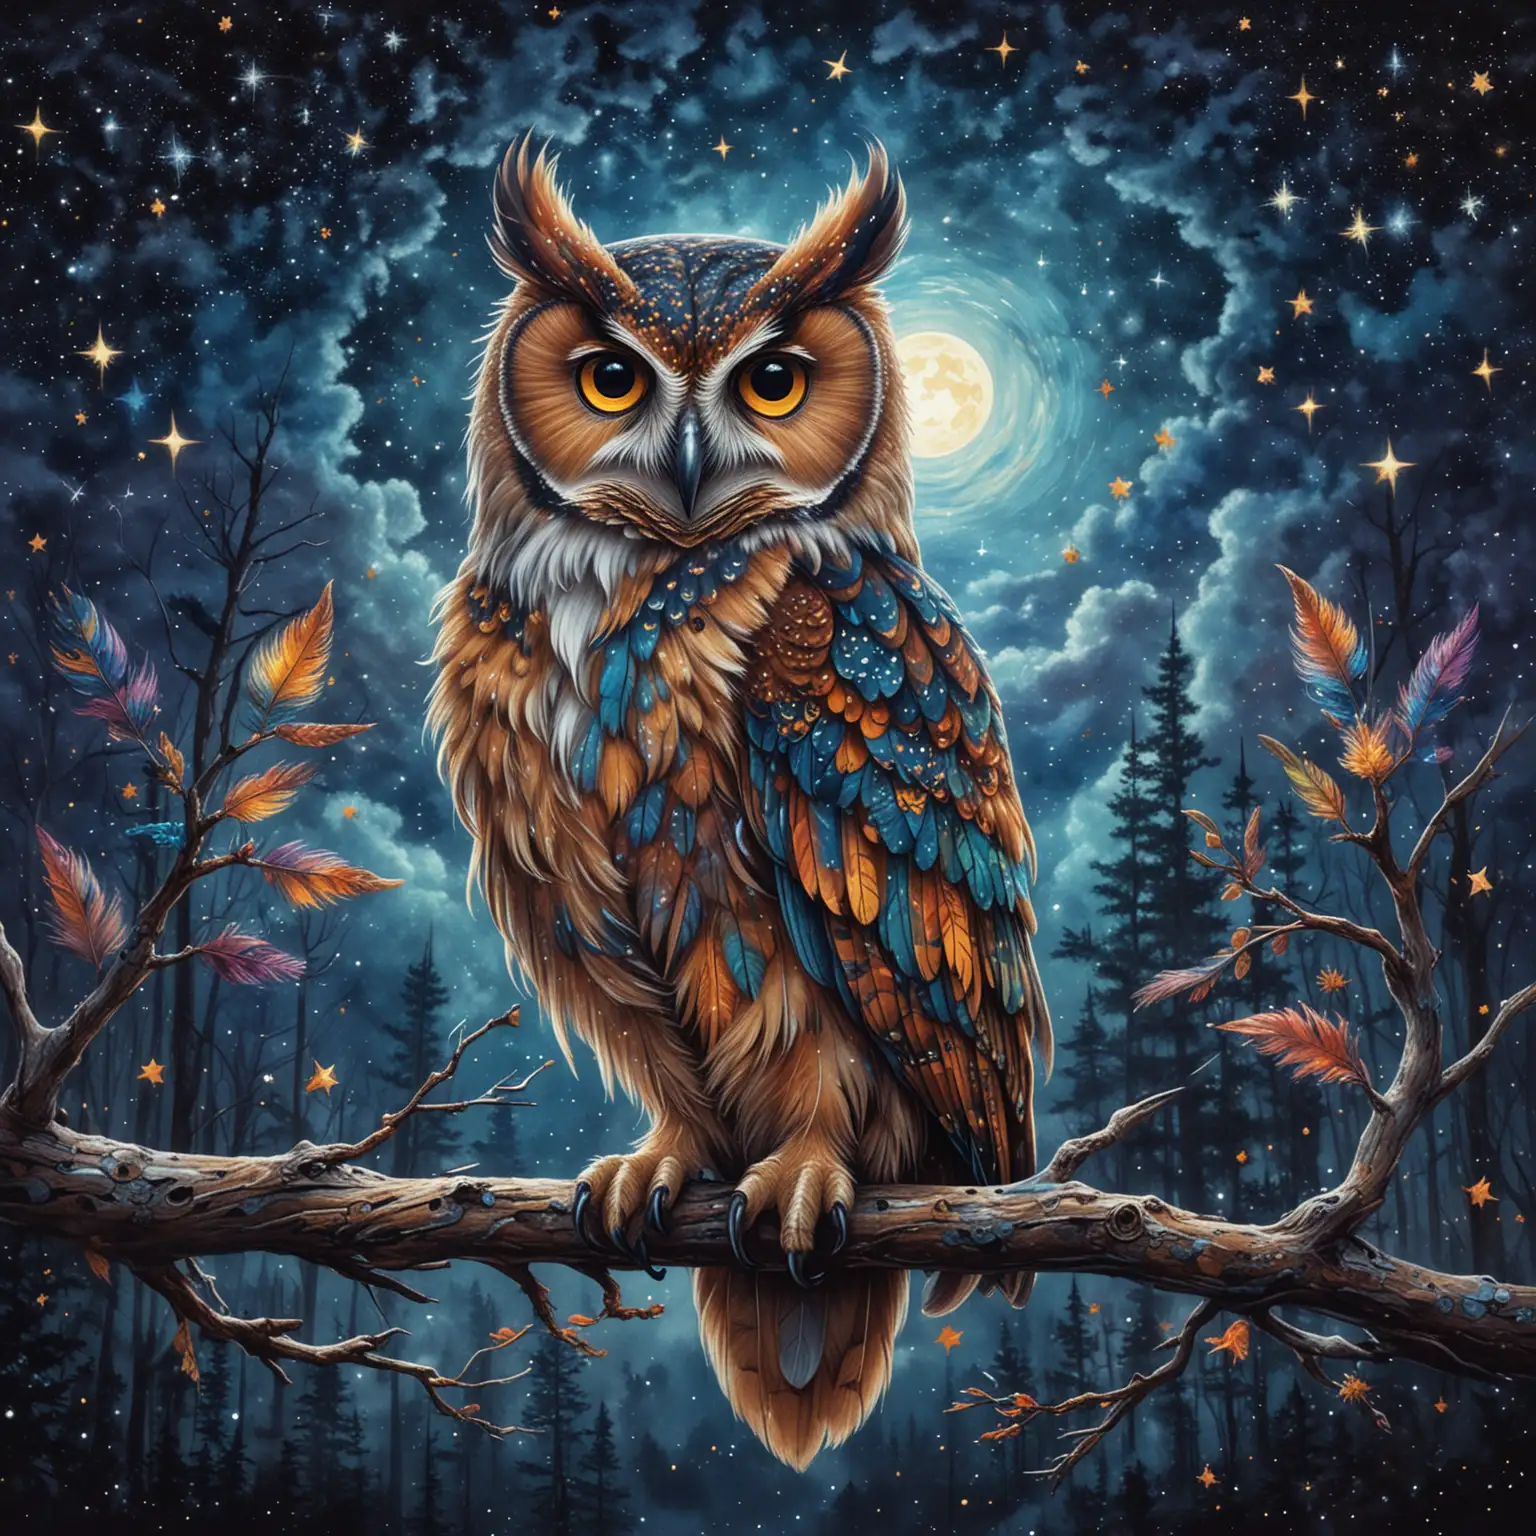 An owl with vibrant, whimsical feathers perched on a branch against a starry night sky background, conveying a sense of fantasy and magic.